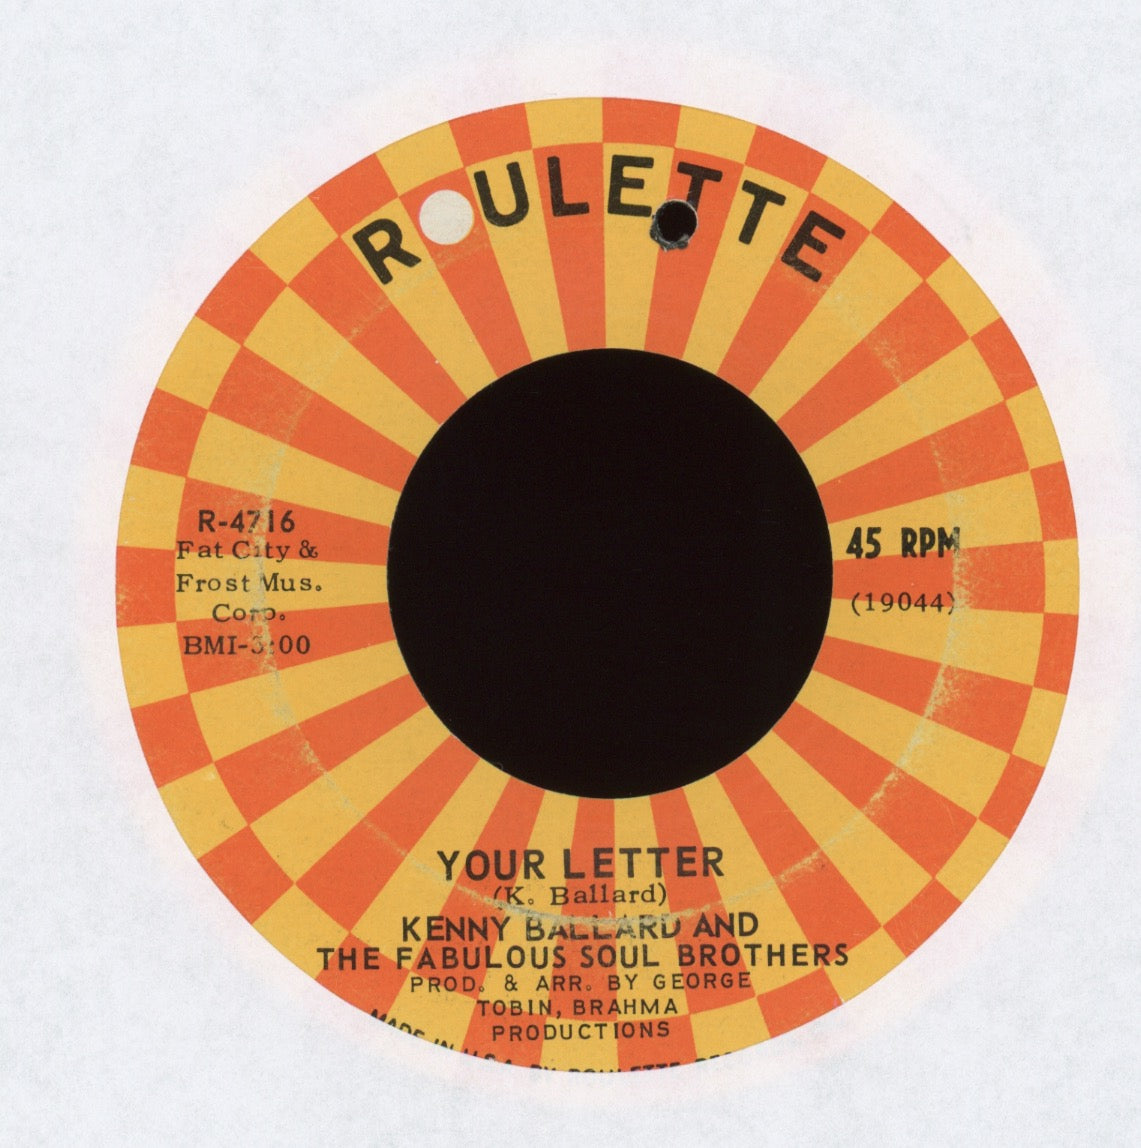 Kenny Ballard & The Fabulous Soul Brothers - I'm Losing You on Roulette